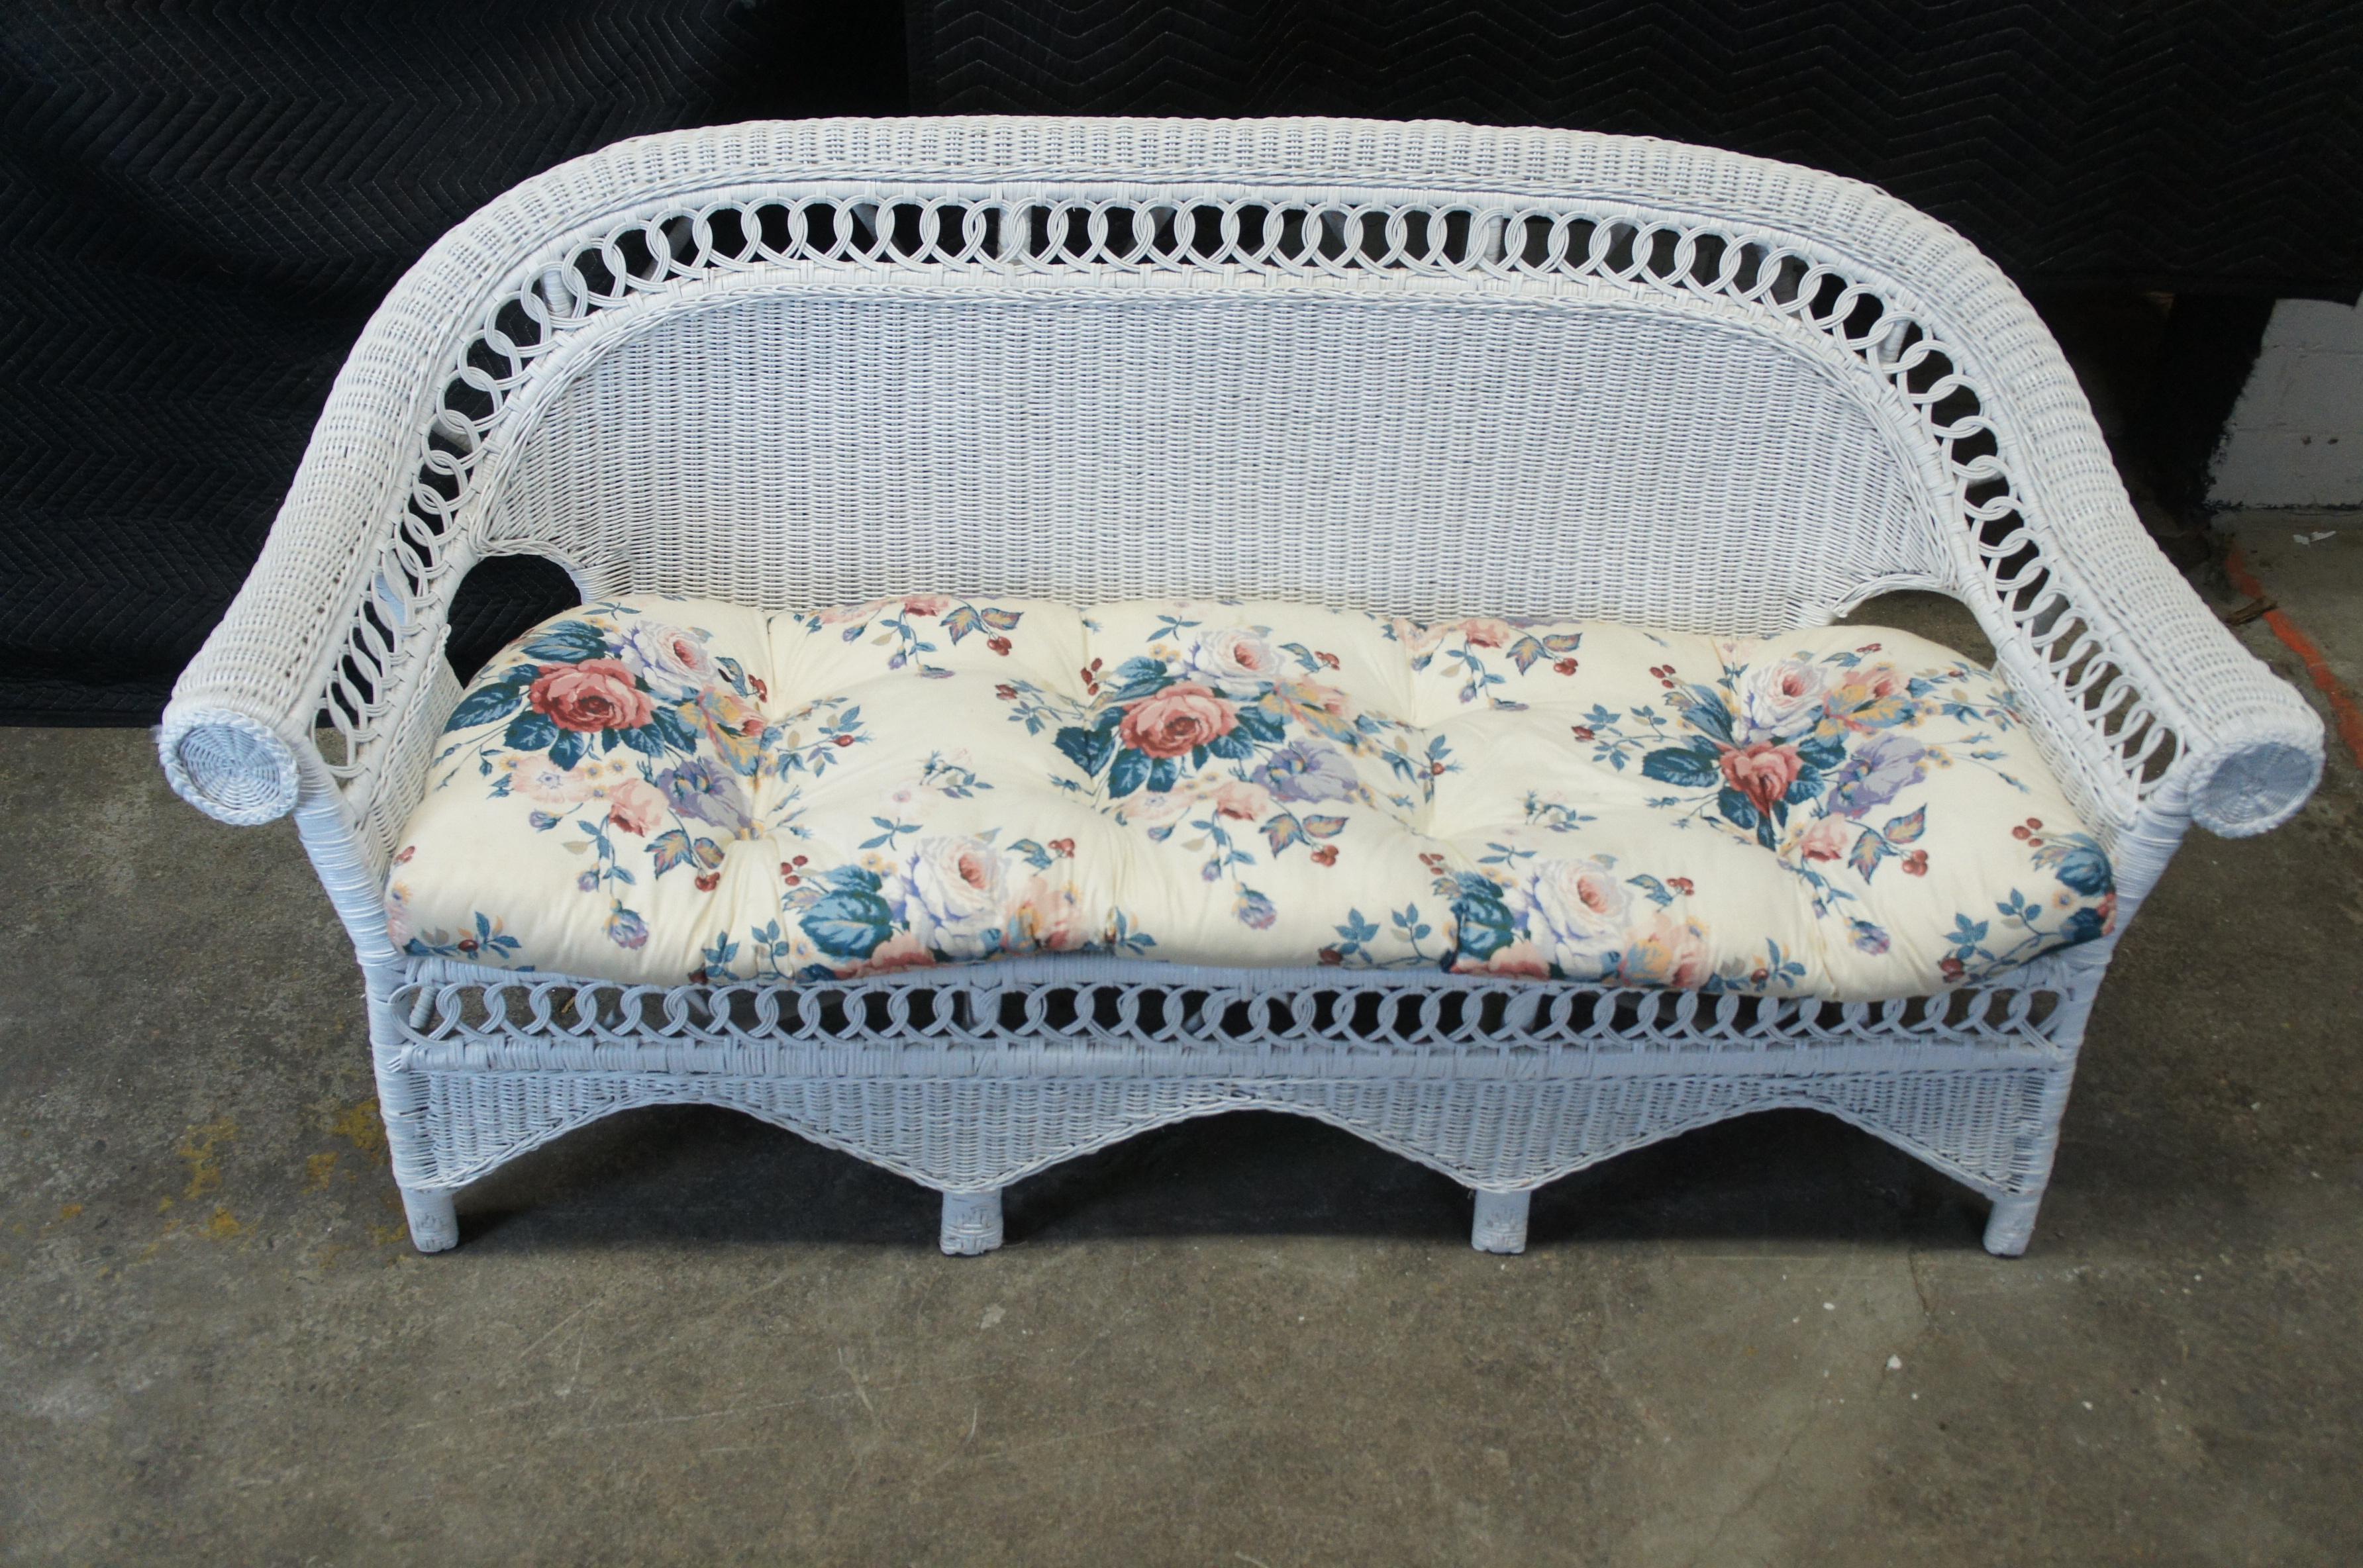 Mid-20th Century Victorian Revival White Wicker Rattan Rolled Arm Sofa Settee Love Seat Boho Chic